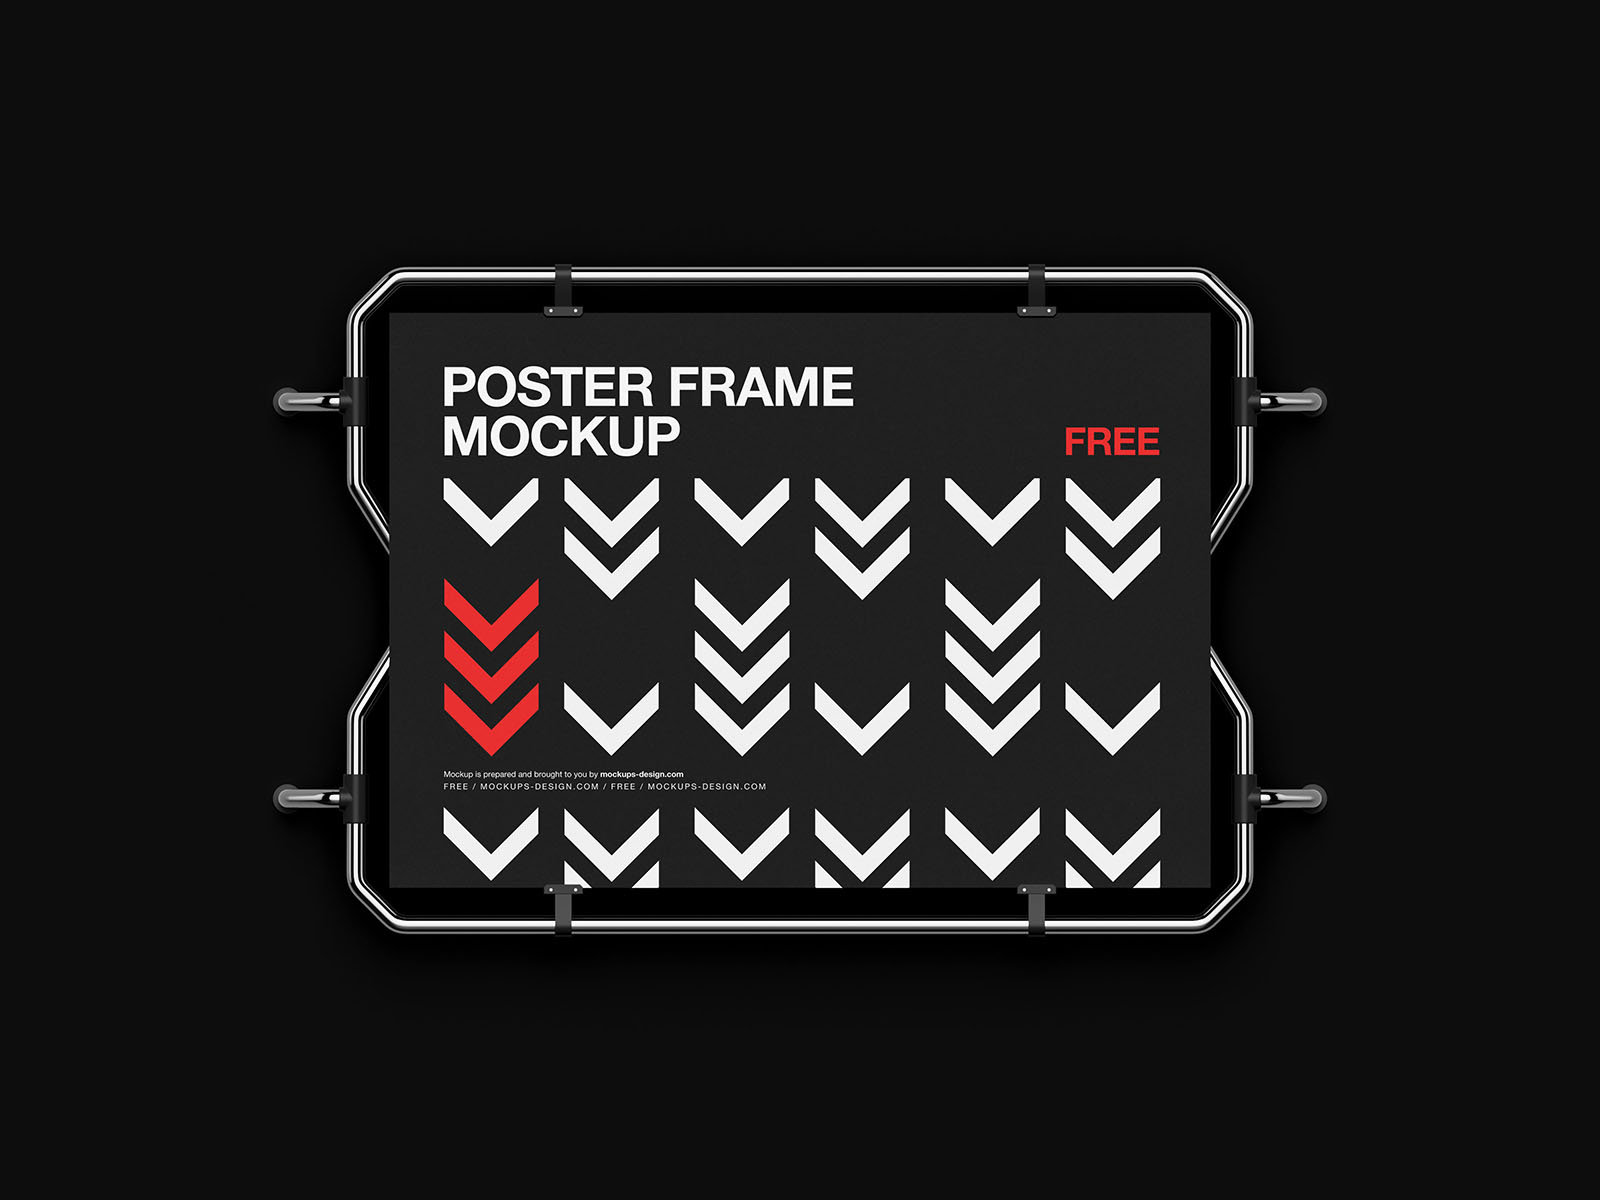 4 Wall Mounted A4, A3 Poster Mockups in Varied Shots FREE PSD